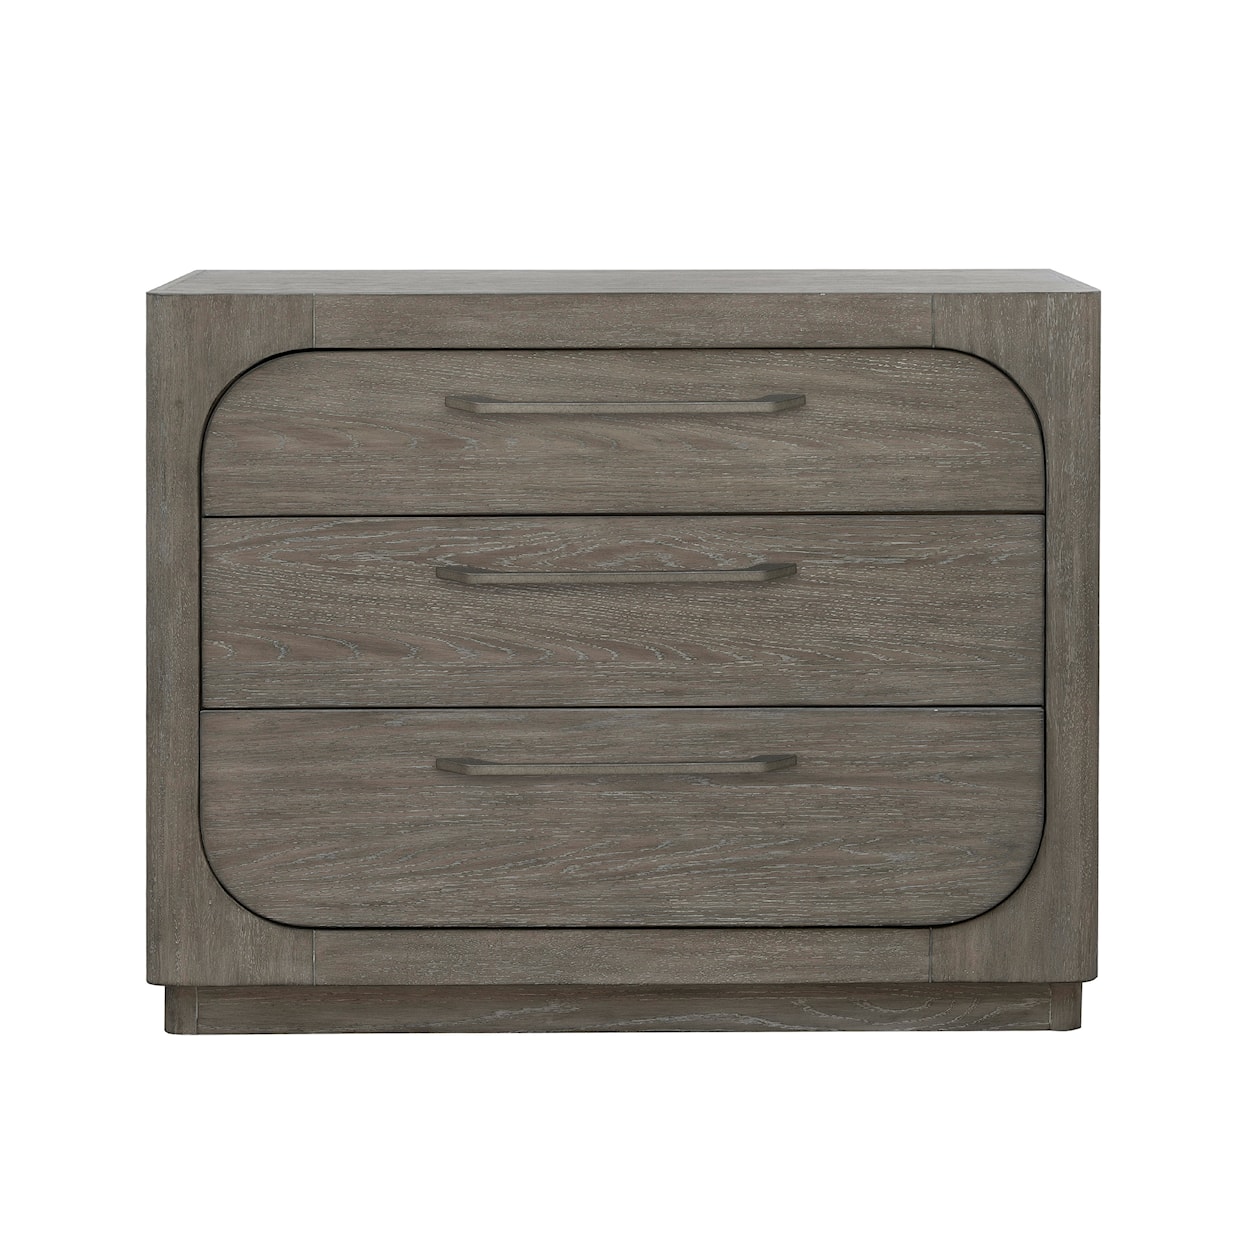 Drew & Jonathan Home Griffith Accent Chest